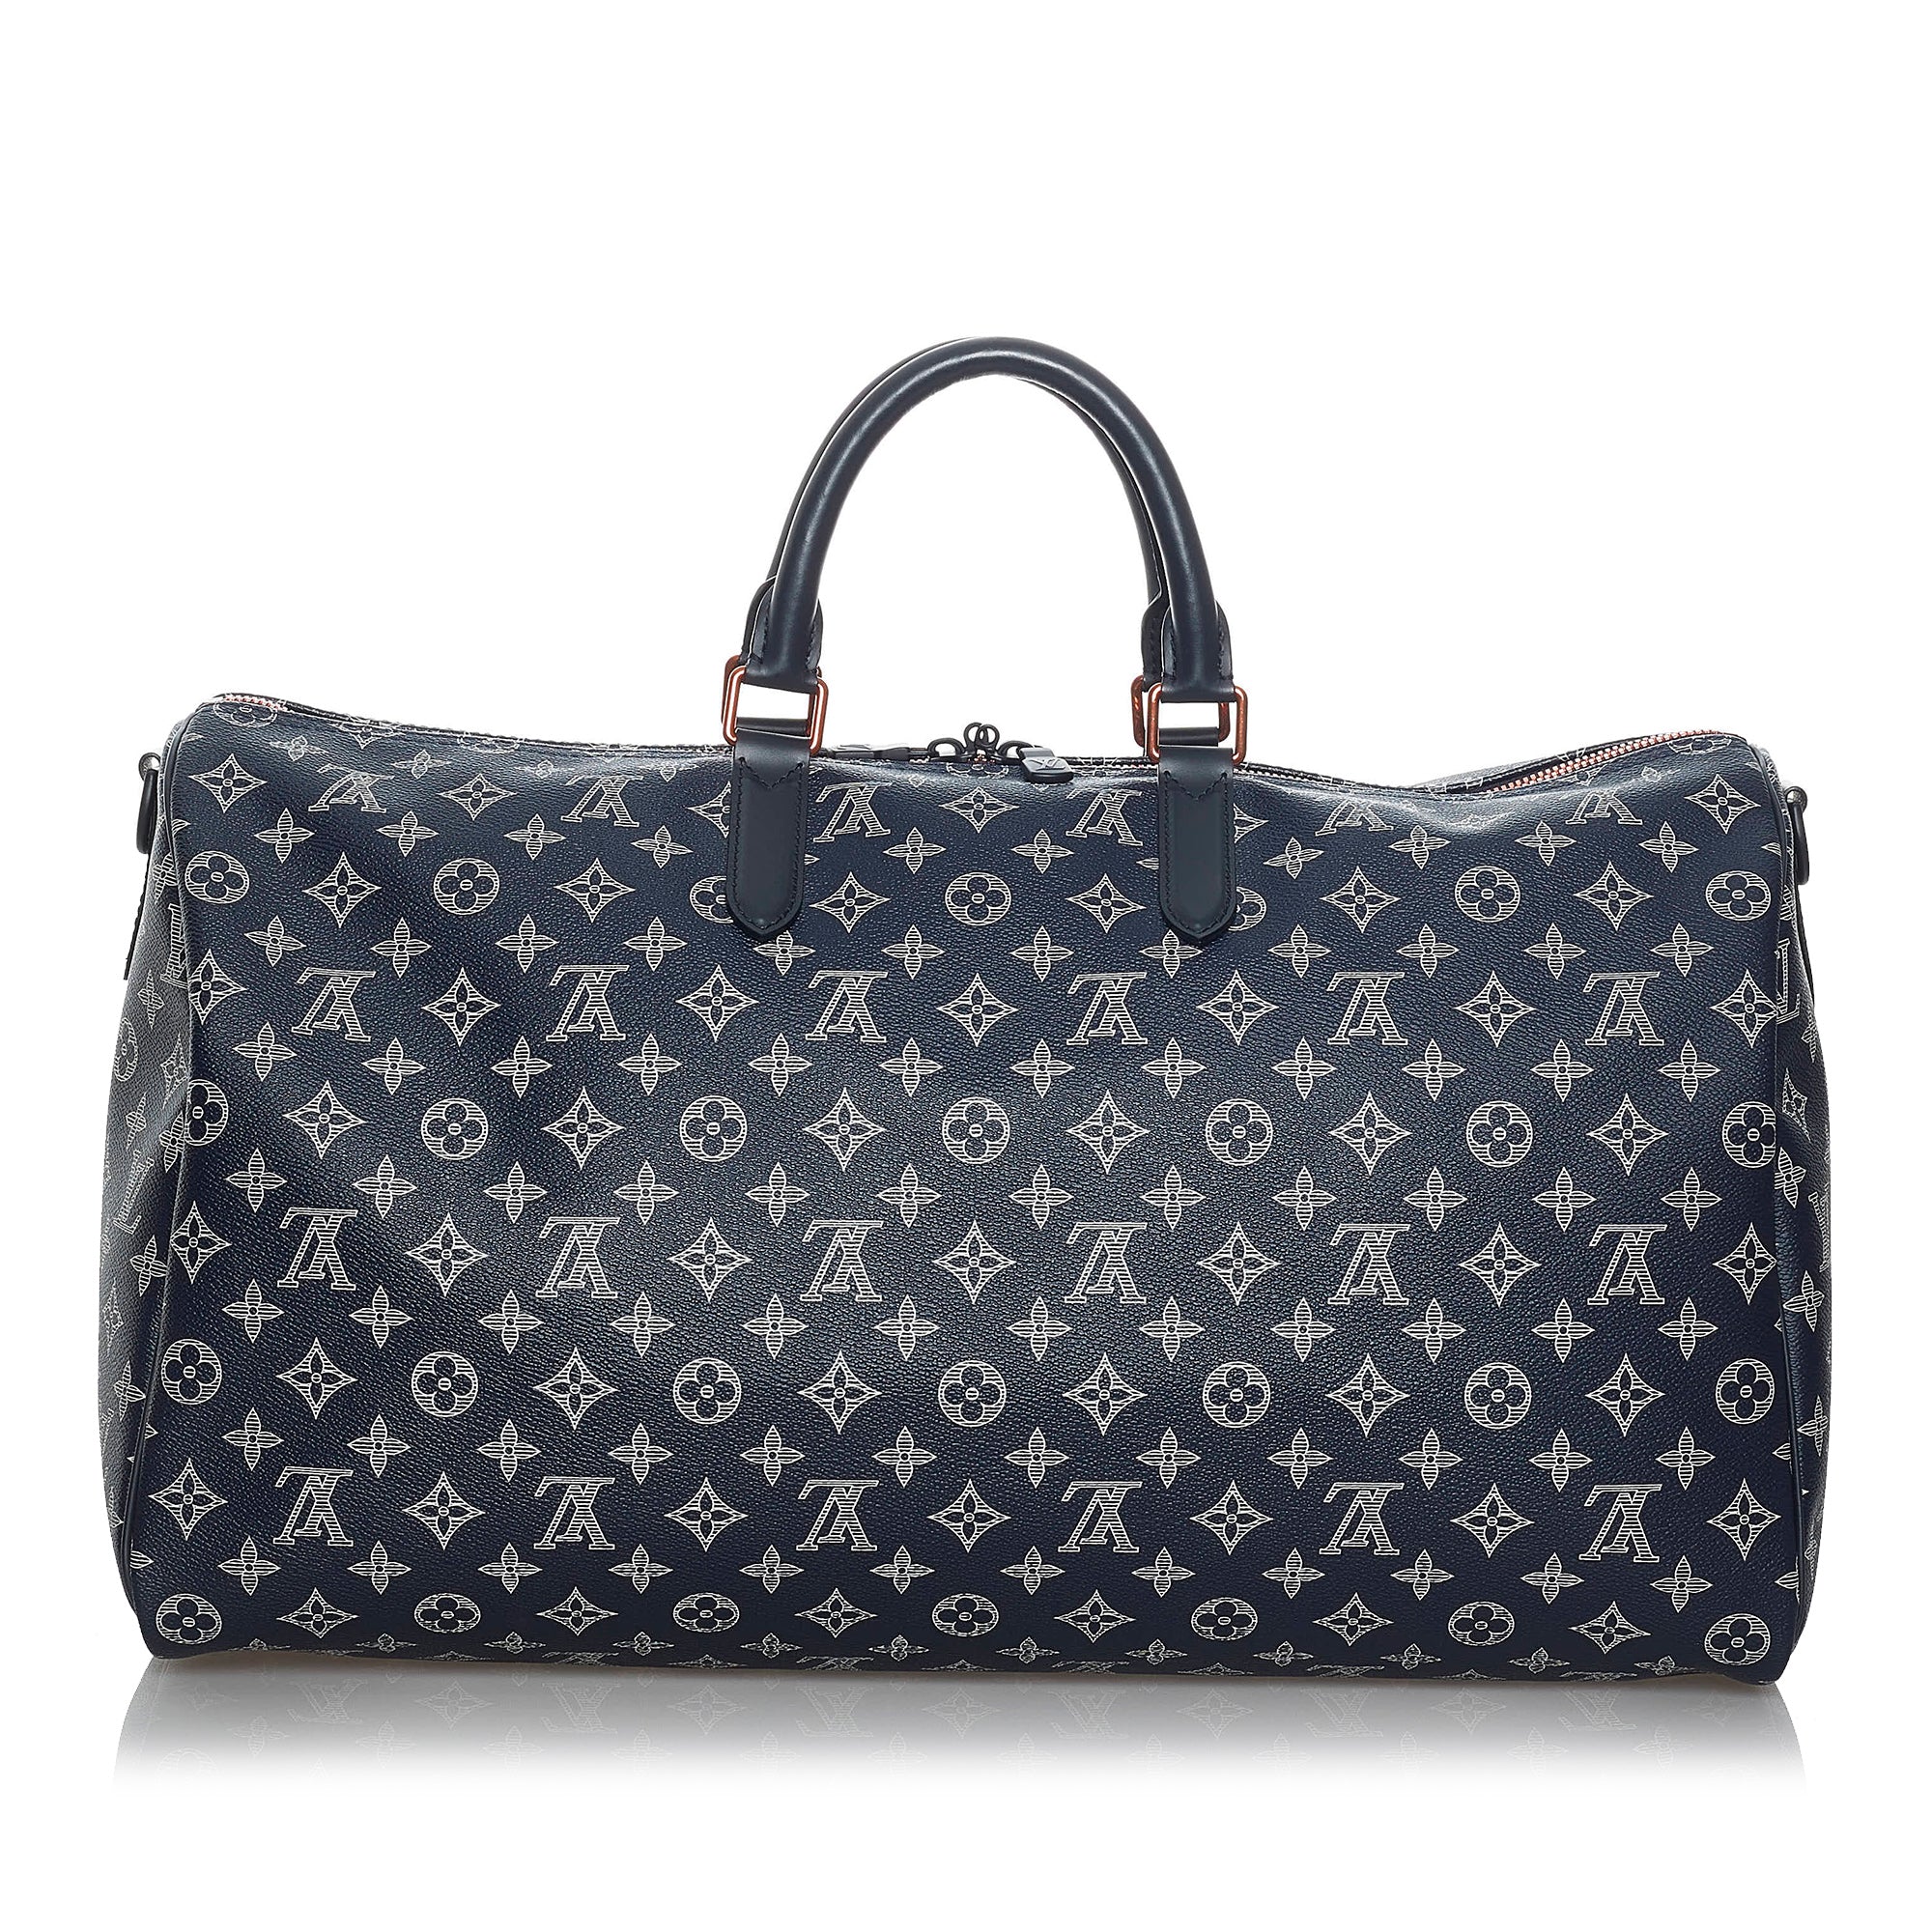 Preloved Louis Vuitton Monogram Upside Down Ink Keepall Bandouliere 50 Duffel Bag 051823 - $200 OFF LIVE SHOW